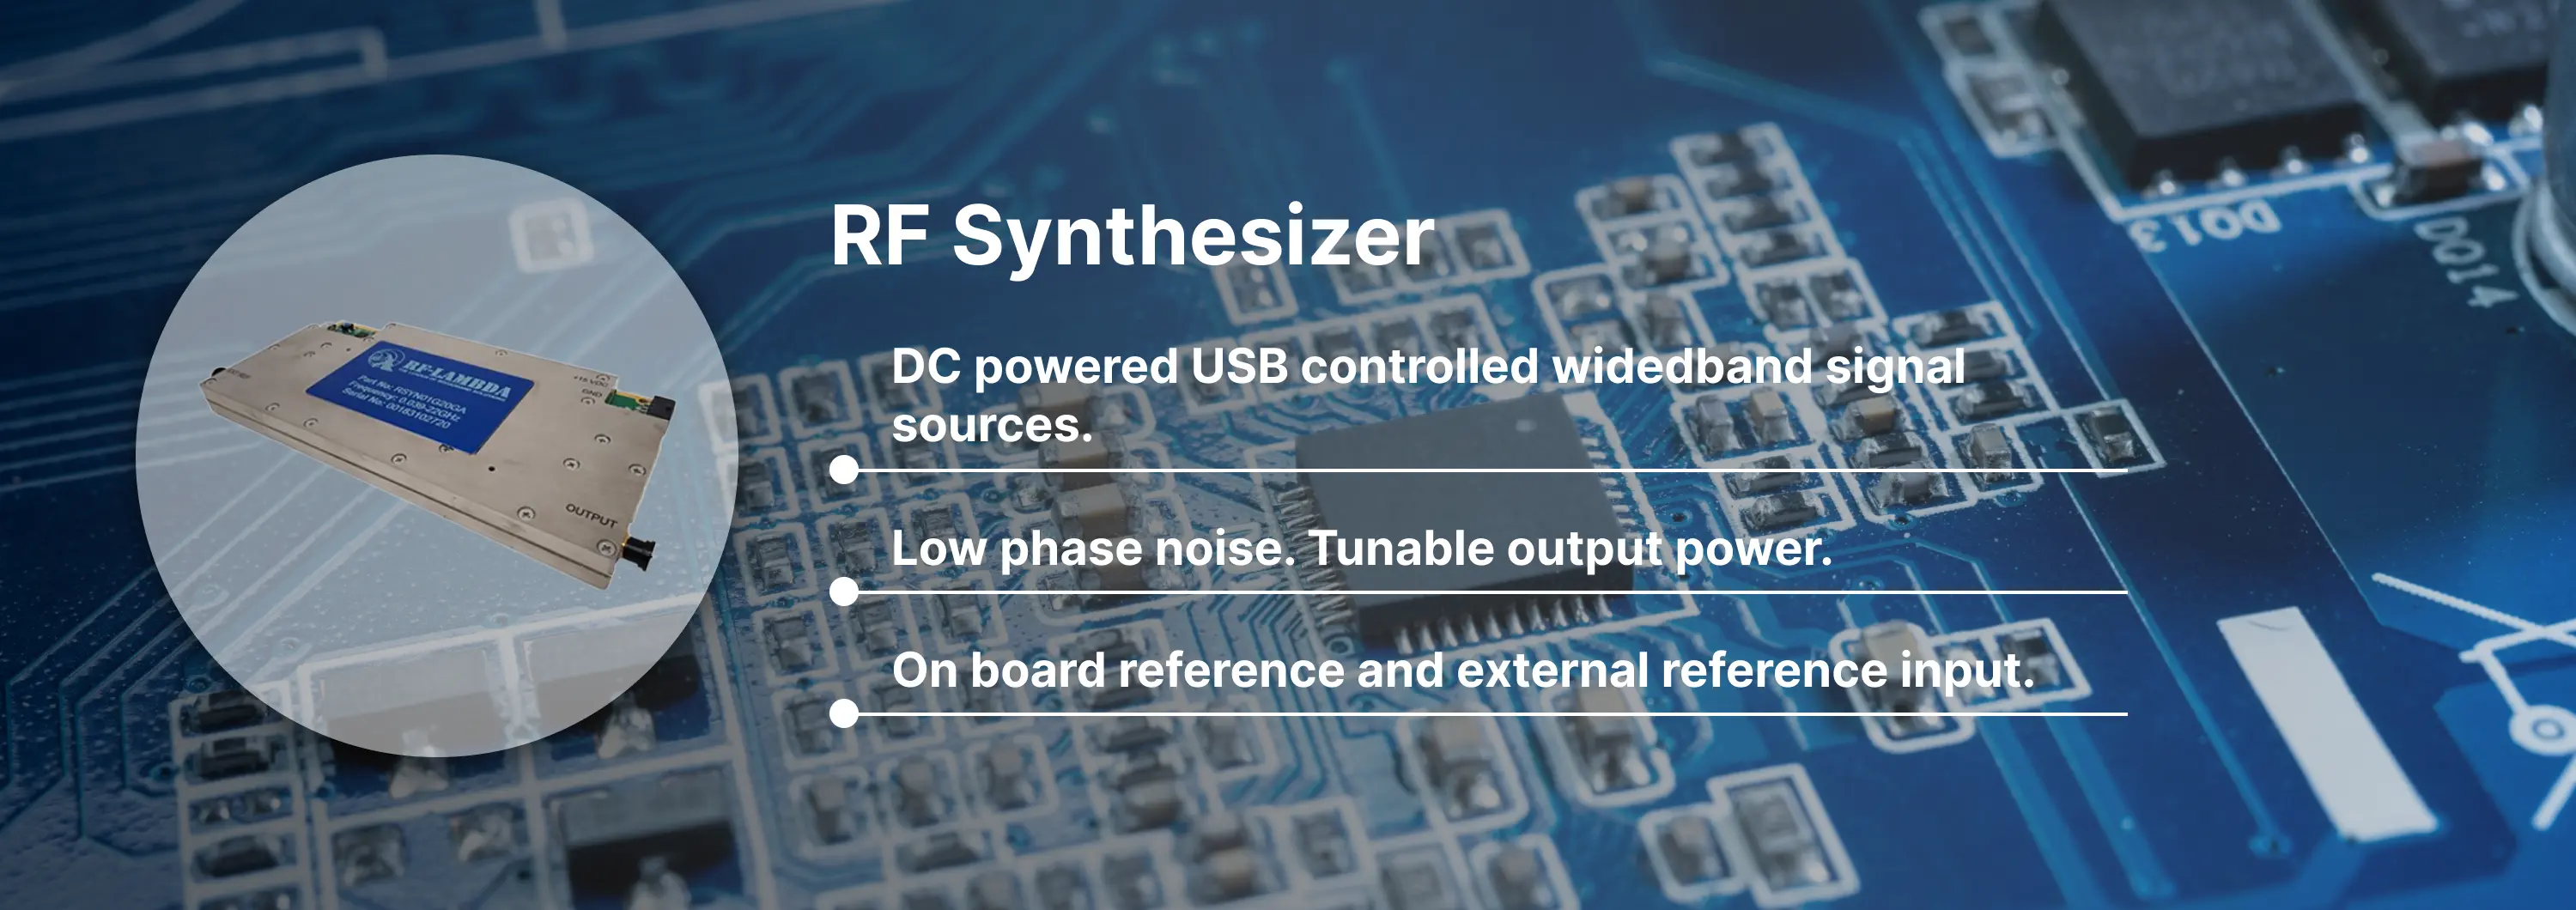 RF Synthesizer Banner